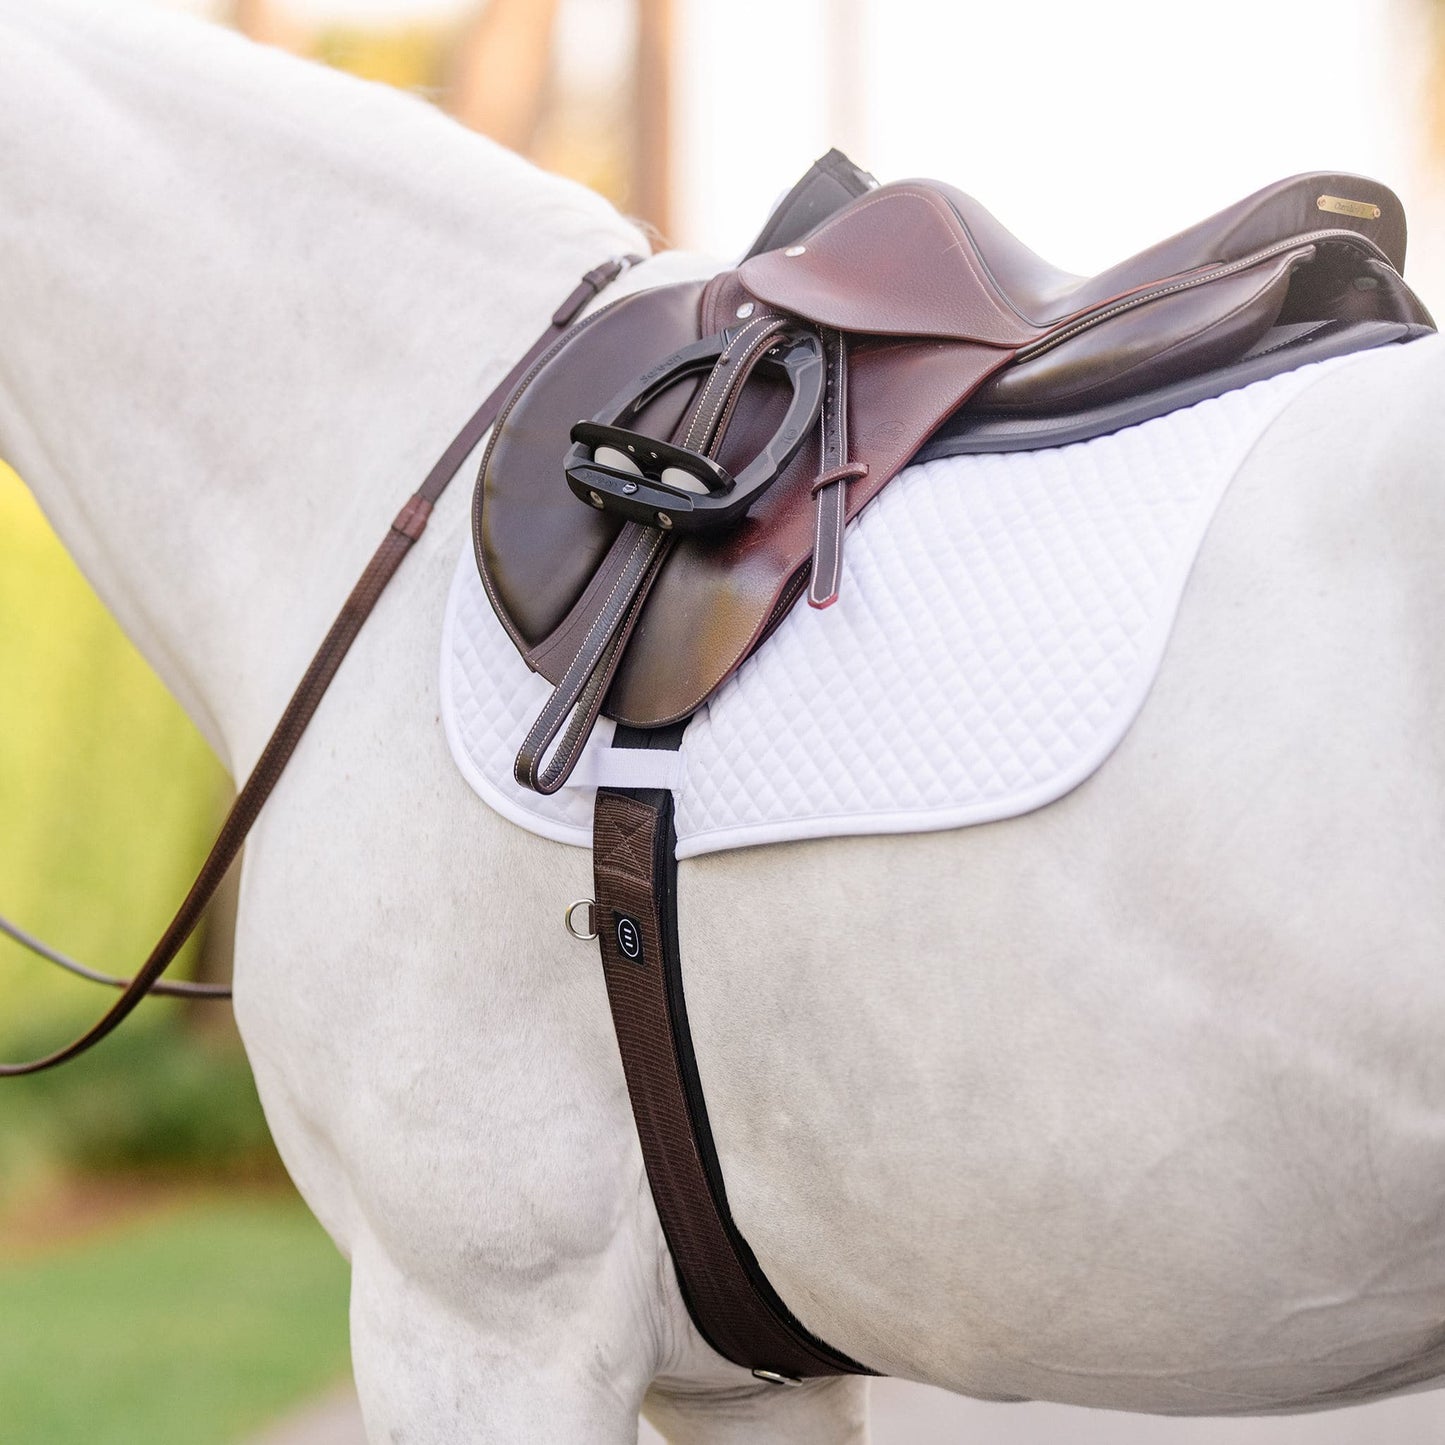 Equifit Essential girth